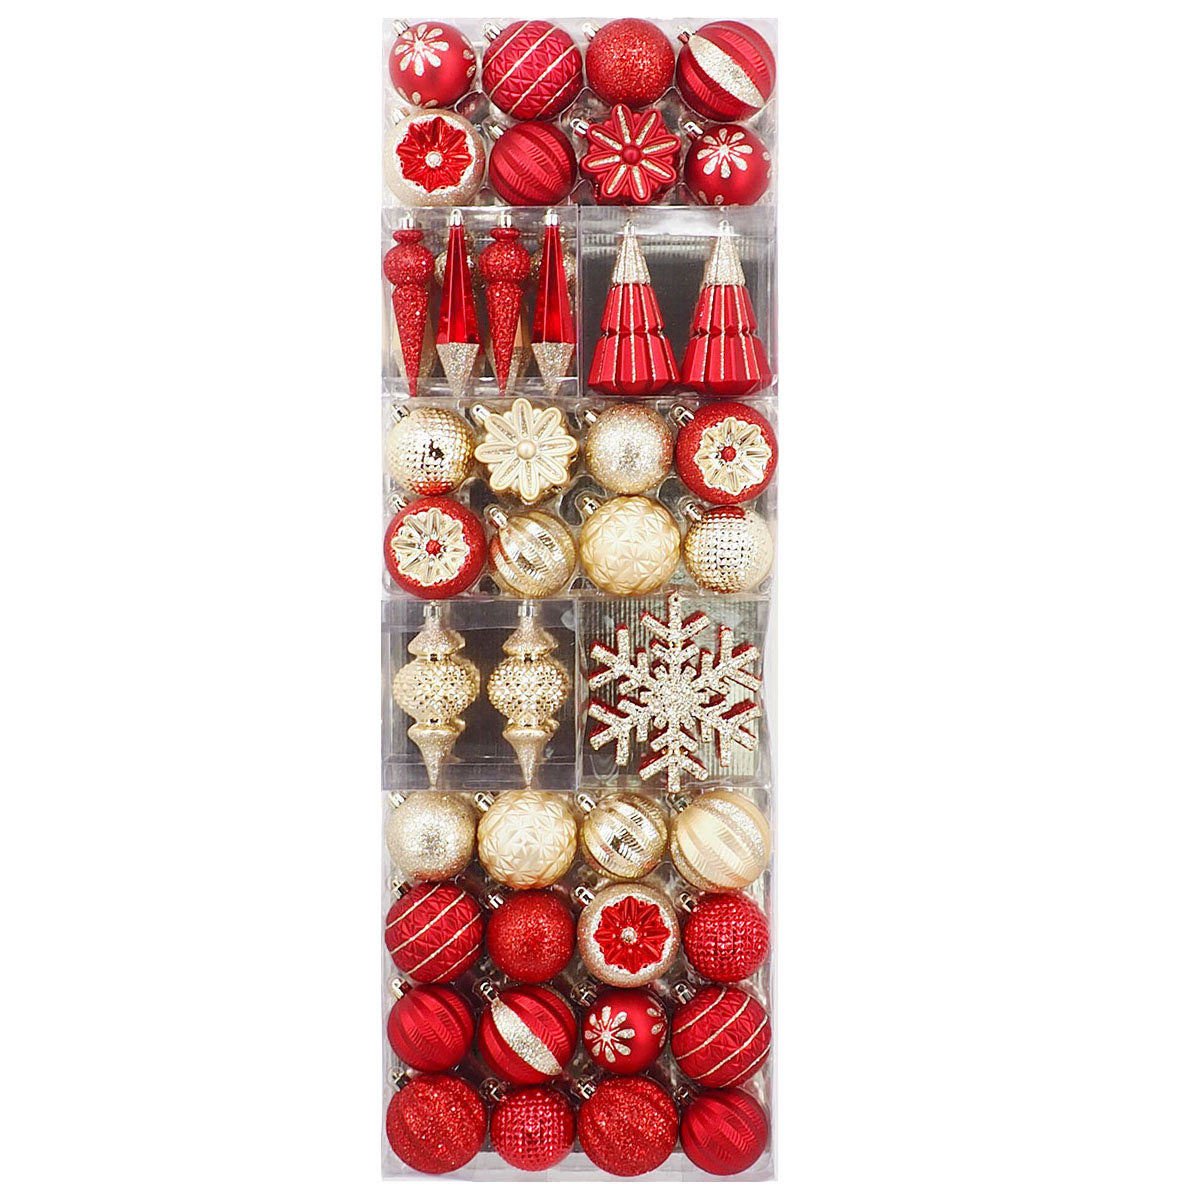 Shatter Resistant 52 Piece Ornament Set in Red and Gold